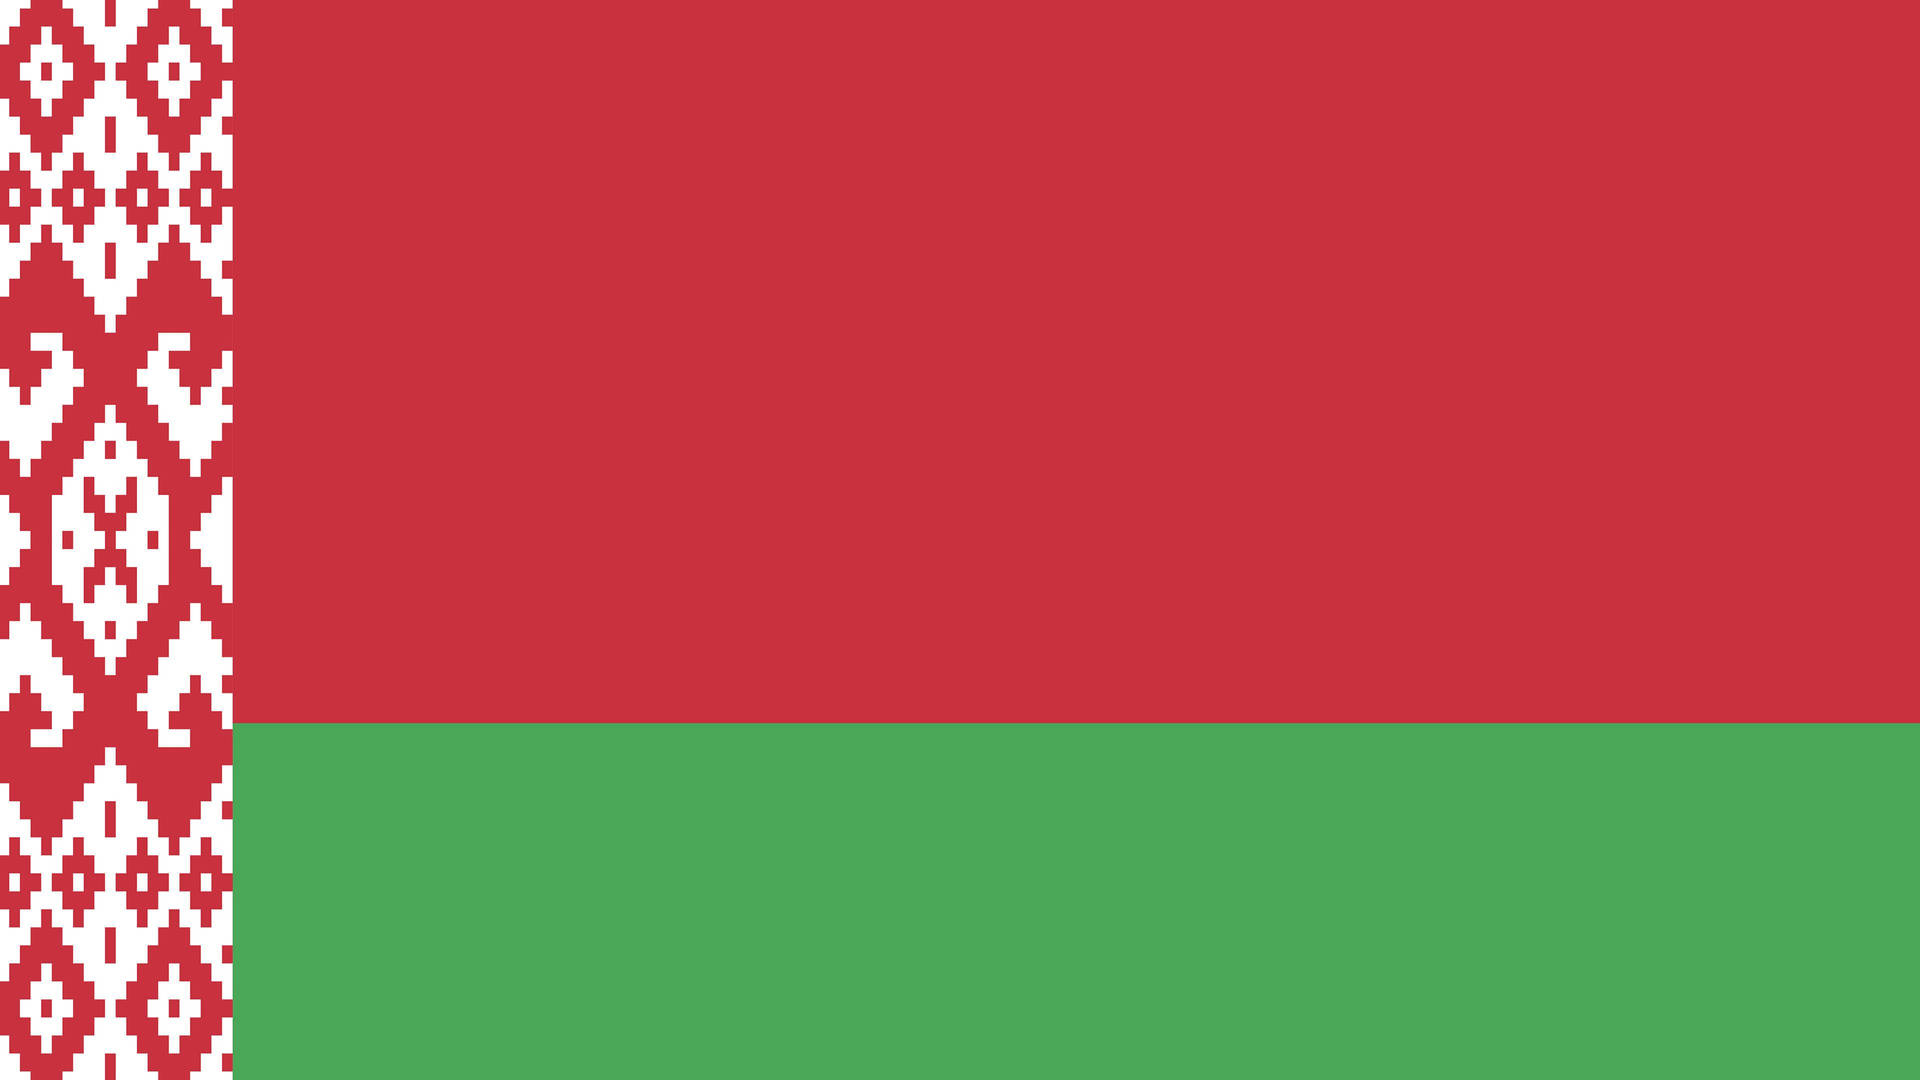 Simple Faded Belarus Flag Picture